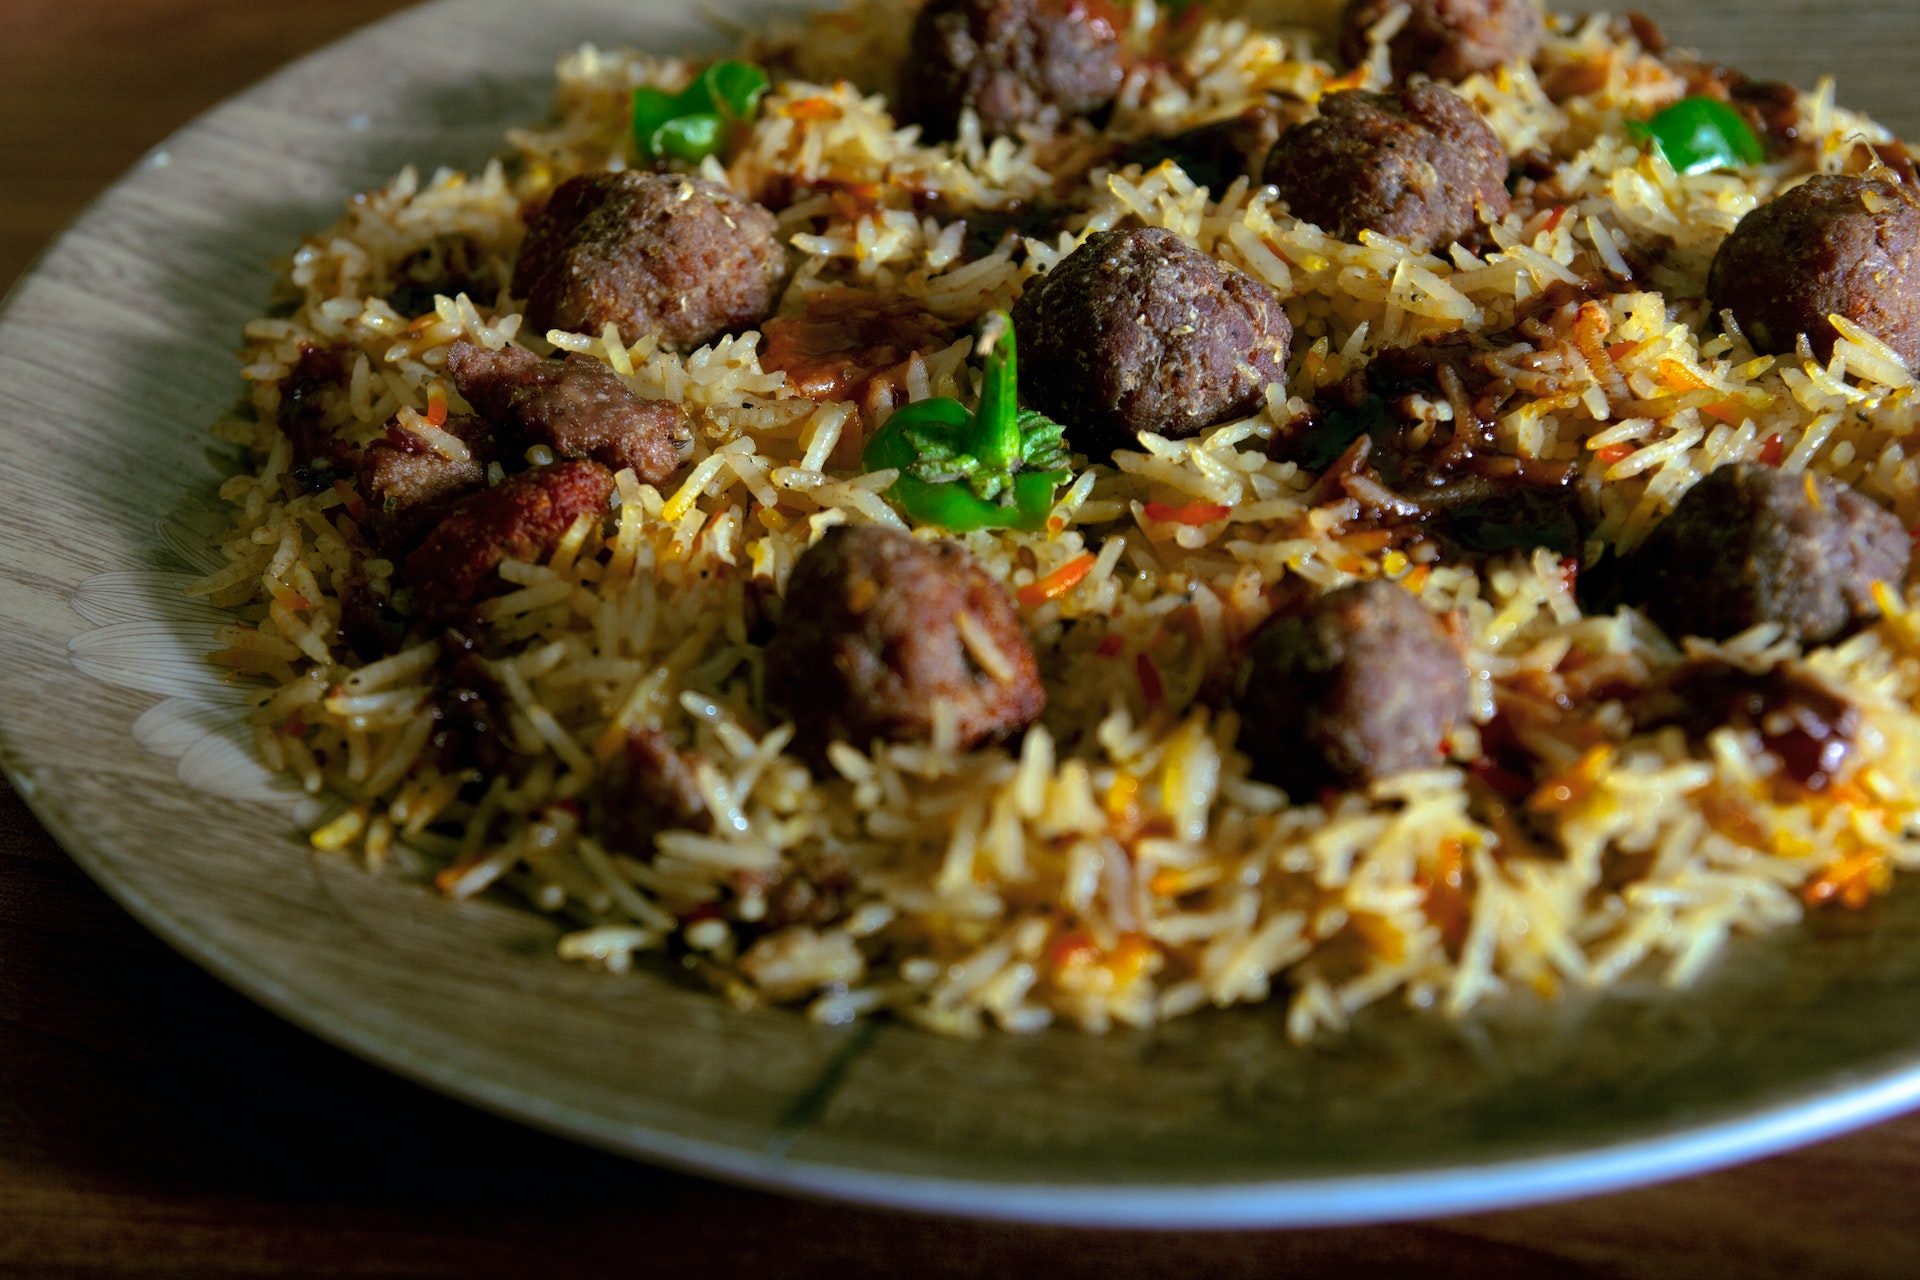 How to Make Rice with Meatballs